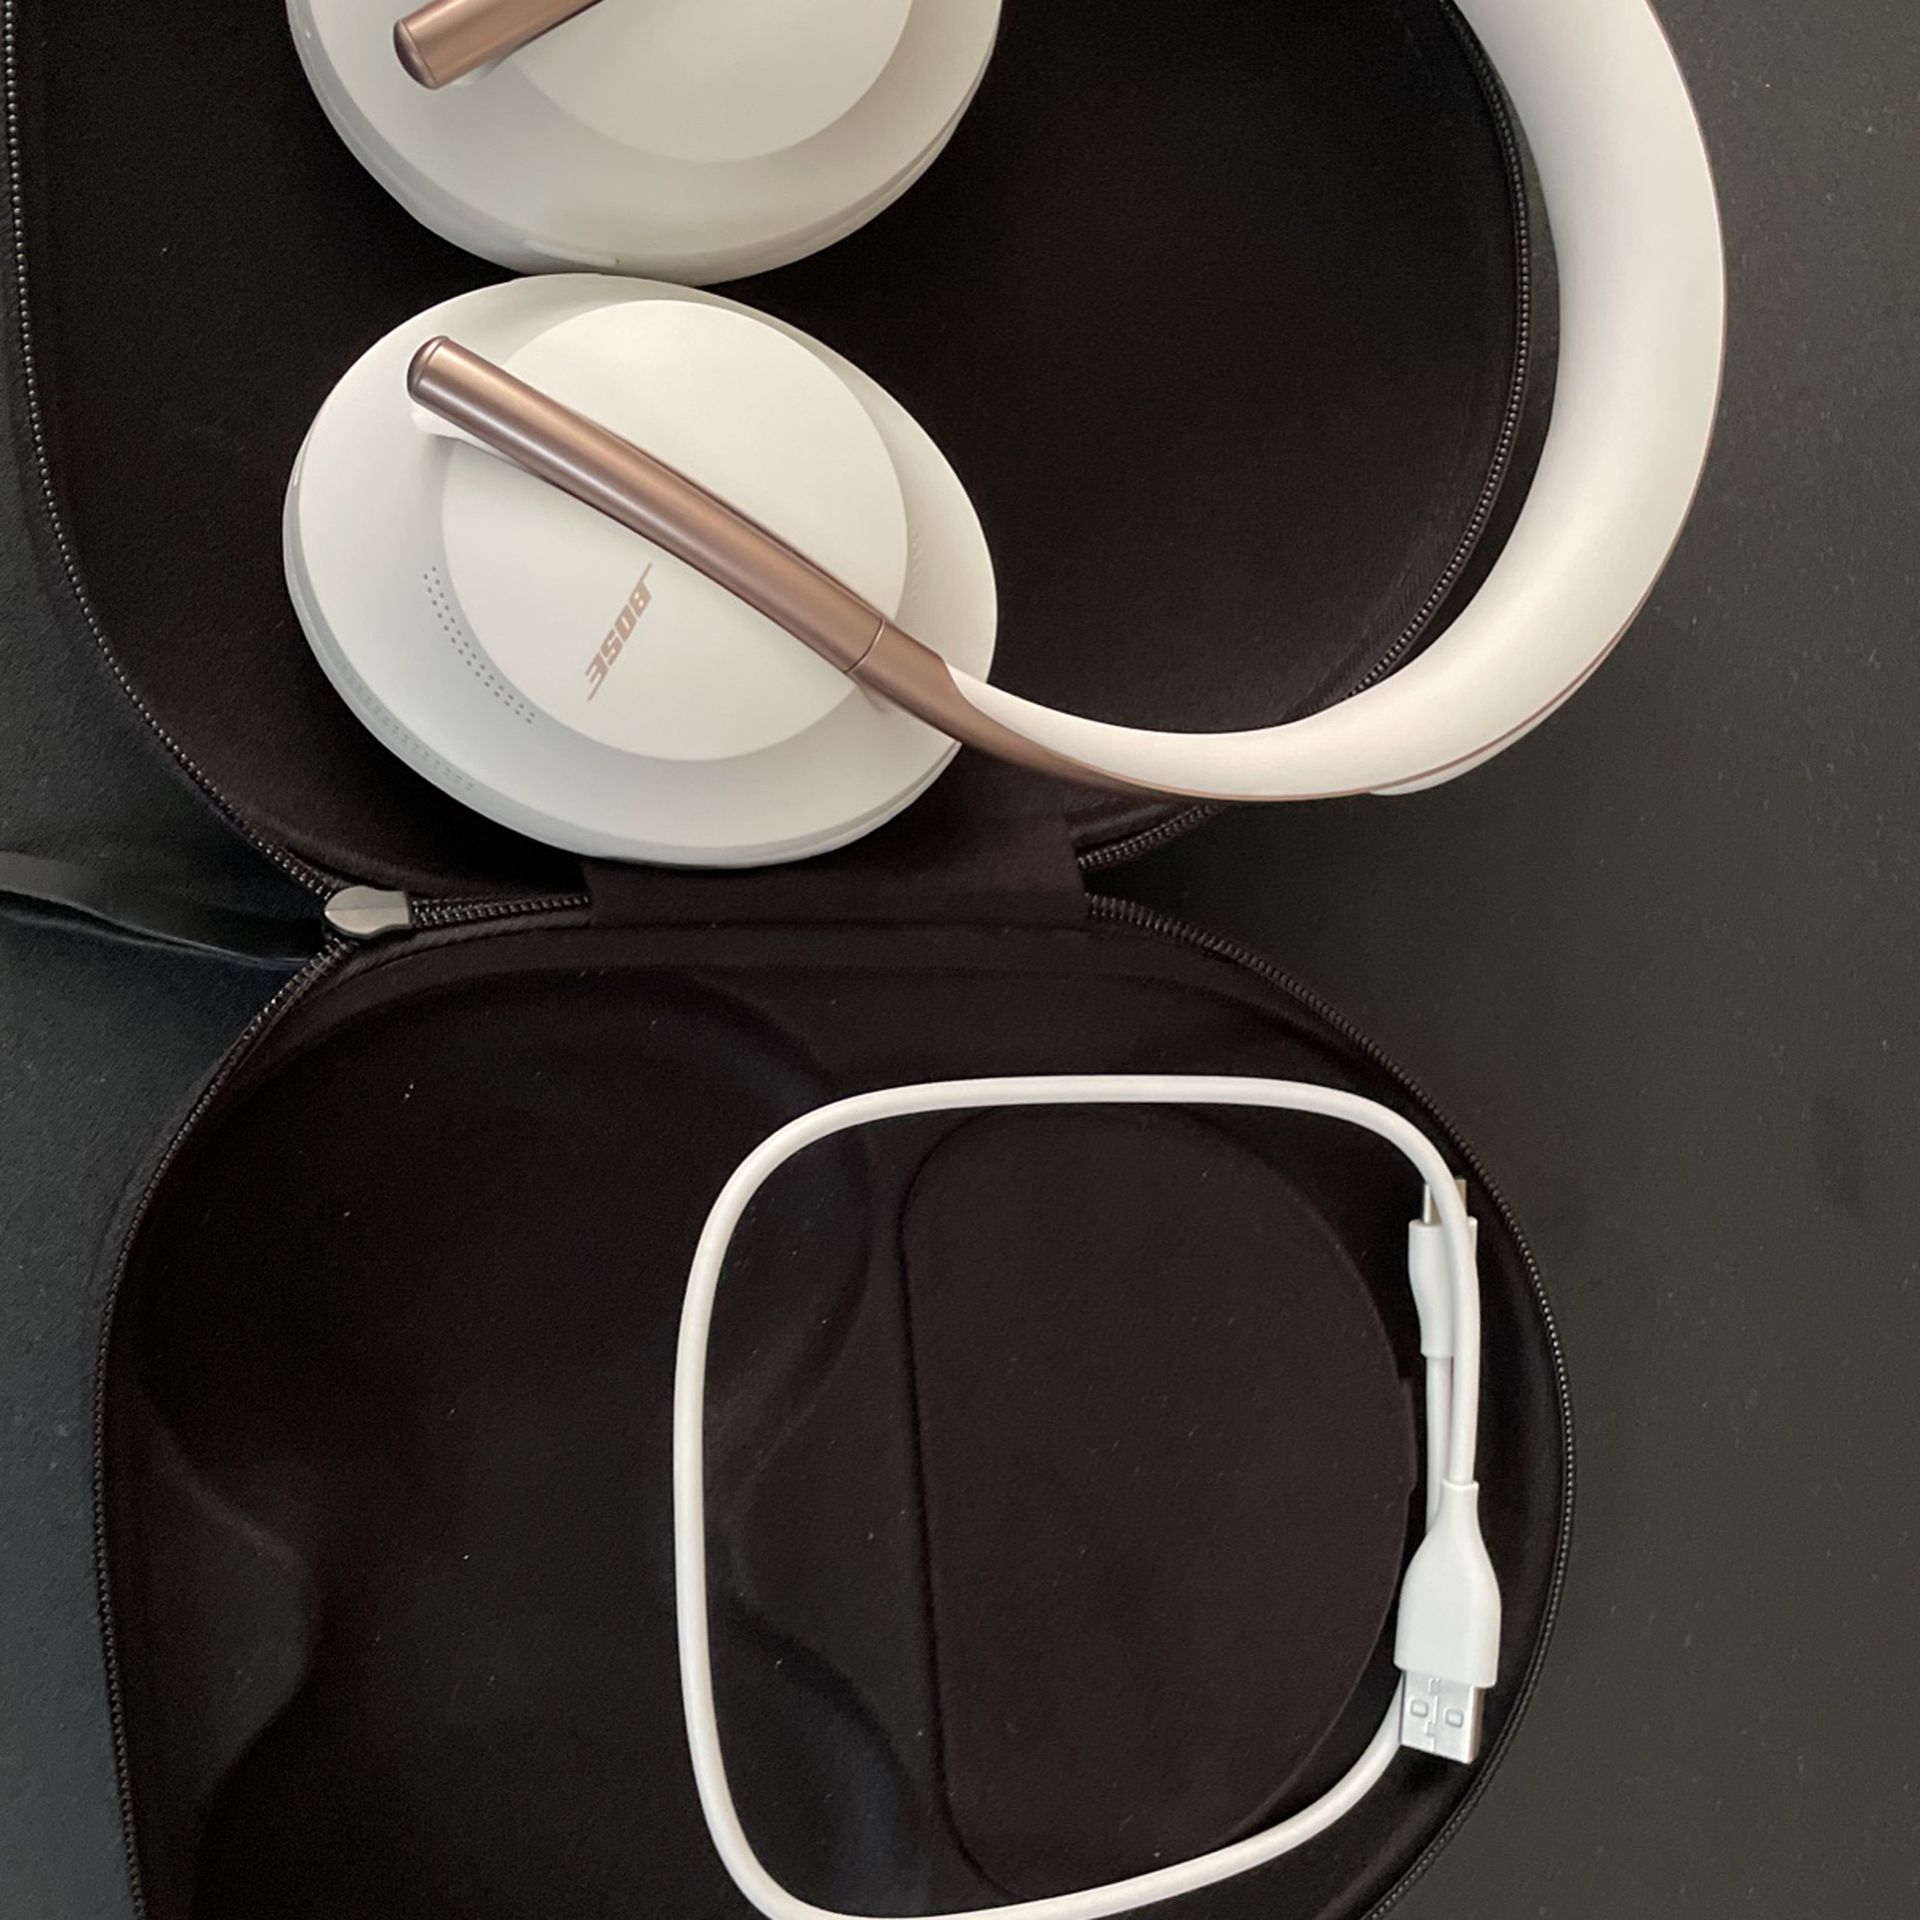 700 Bose, White-Rose Gold, Noise Cancelling, Used - New Condition (1 ...